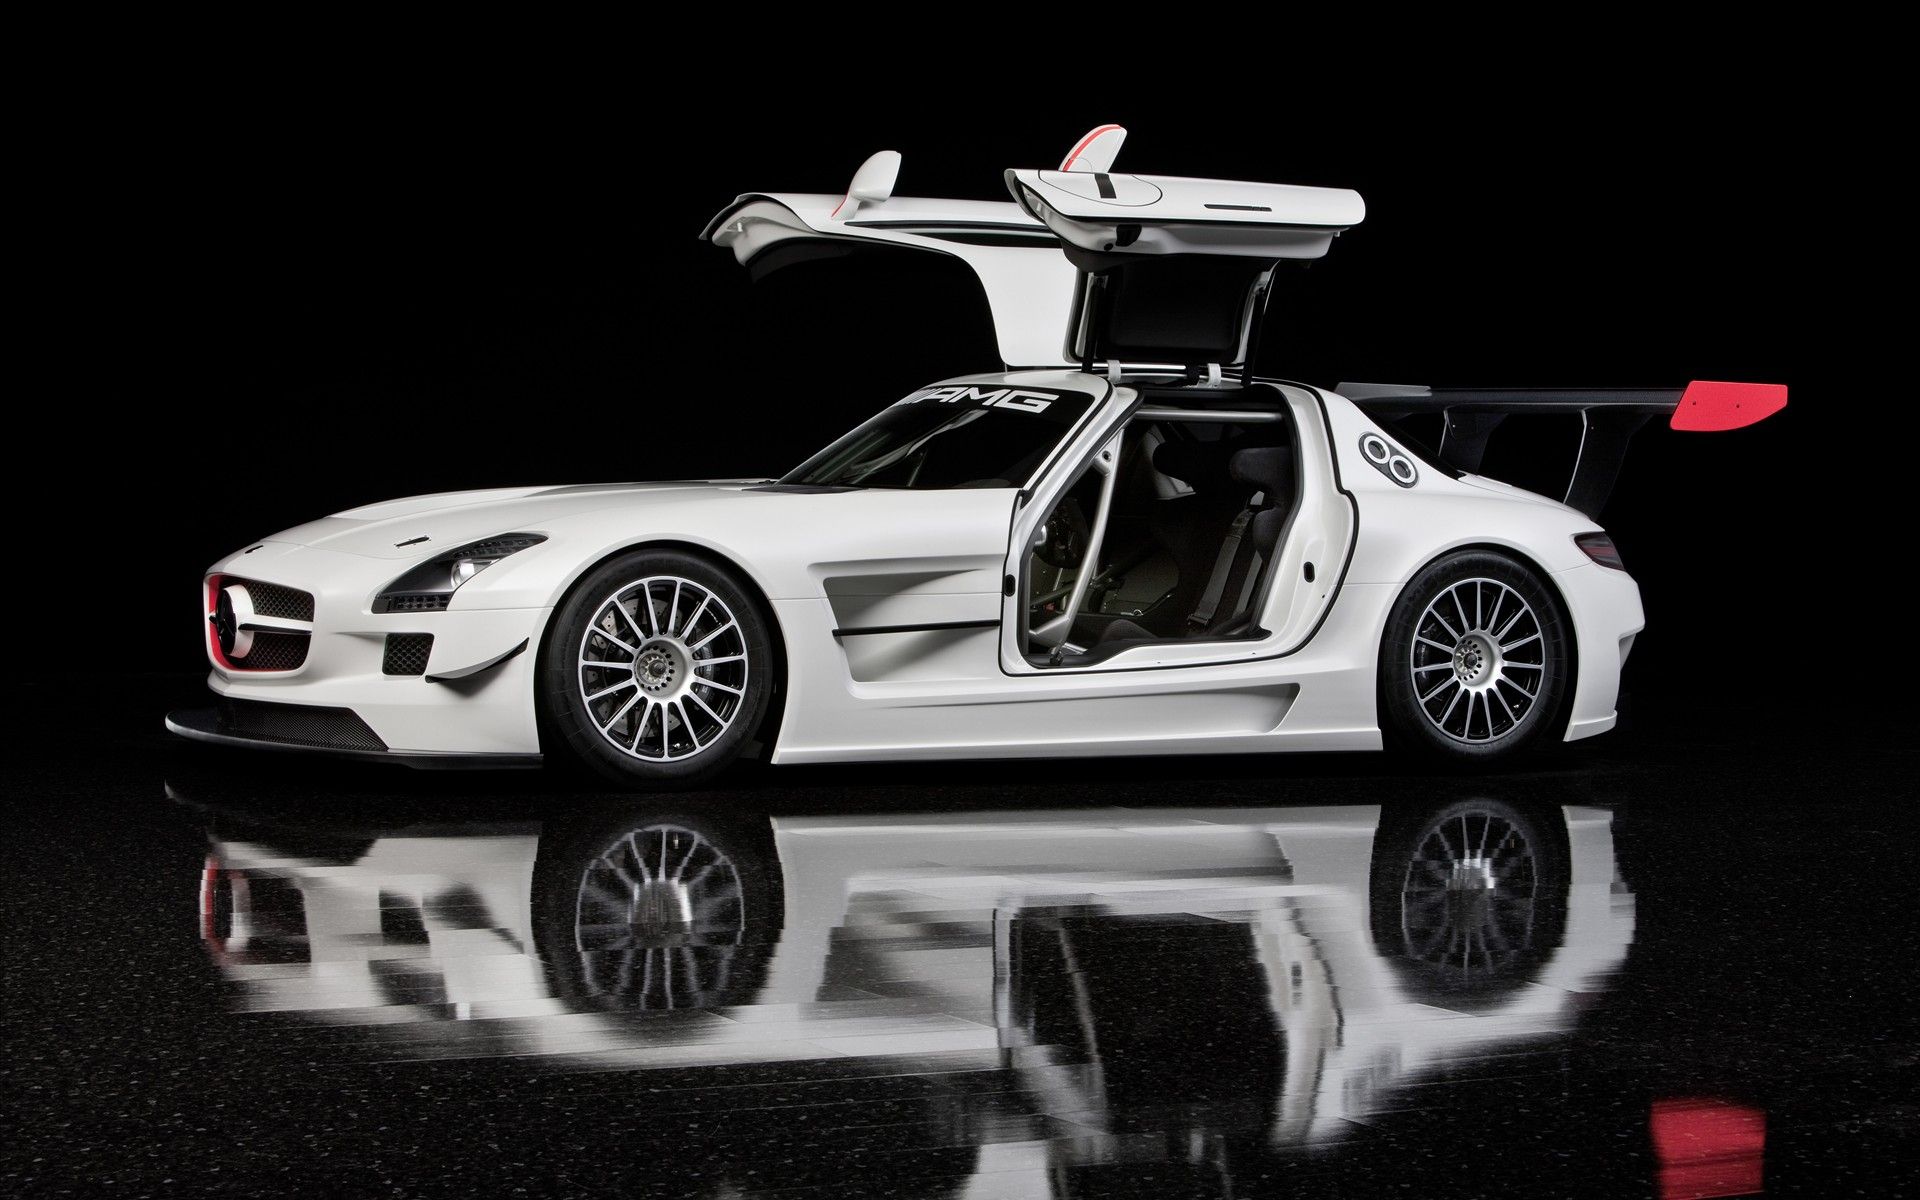 Mercedes Benz SLS AMG HD Wallpapers Full HD Pictures